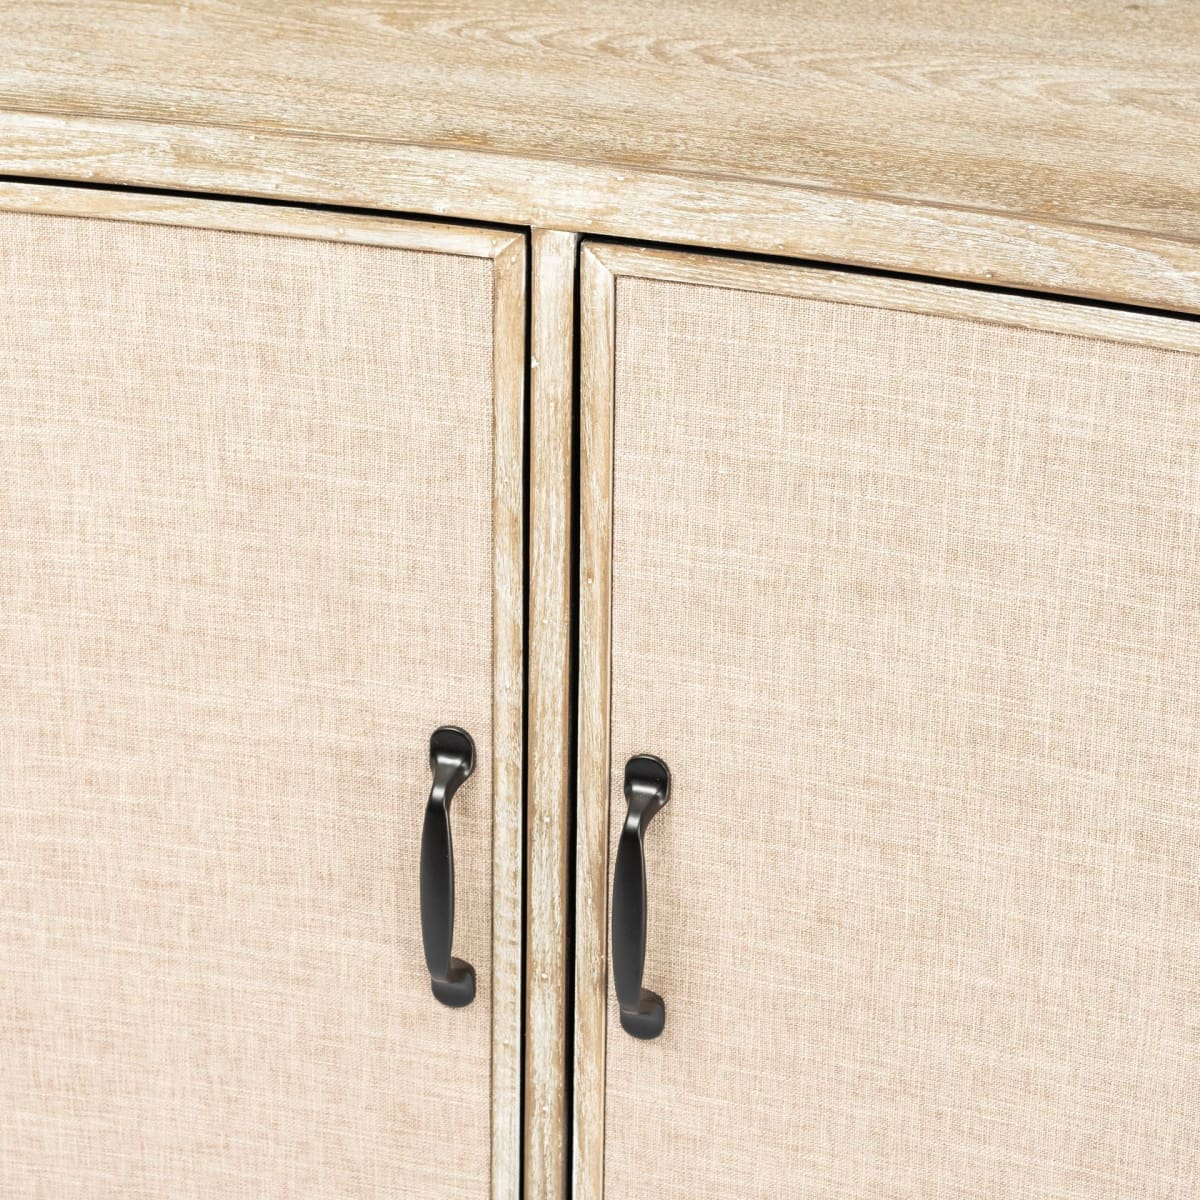 Bellefontaine Accent Cabinet Natural Wood | Cream Fabric - acc-chest-cabinets